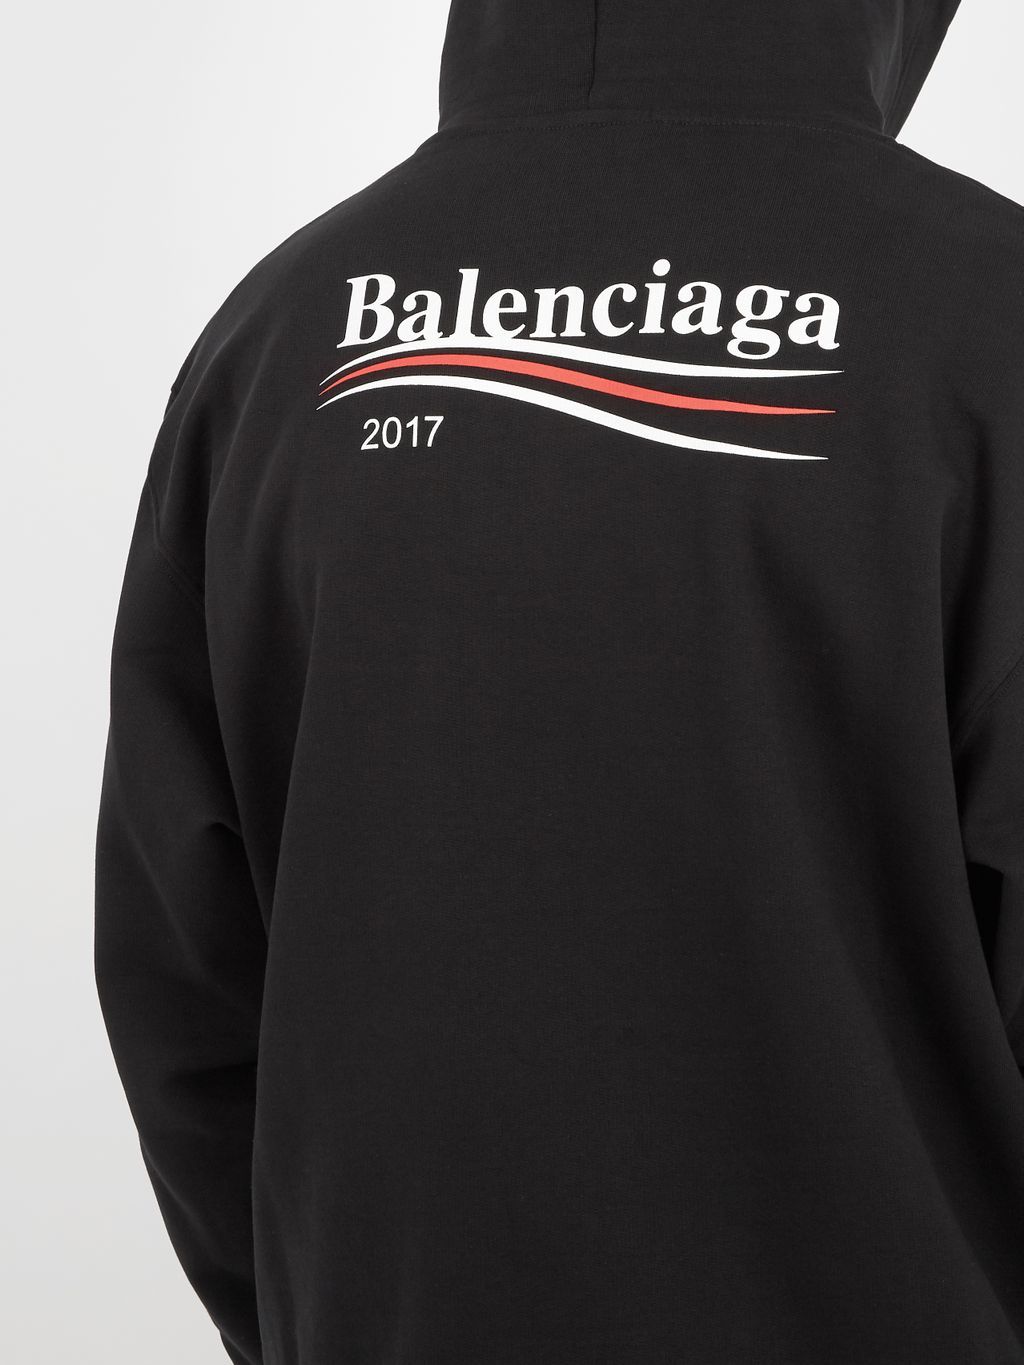 Outfit Myth ar Twitter: "Balenciaga Black Campaign Hoodie On Matches XL! &gt;&gt; https://t.co/csmGdjGdos https://t.co/dr2Jv4fLPF" / Twitter